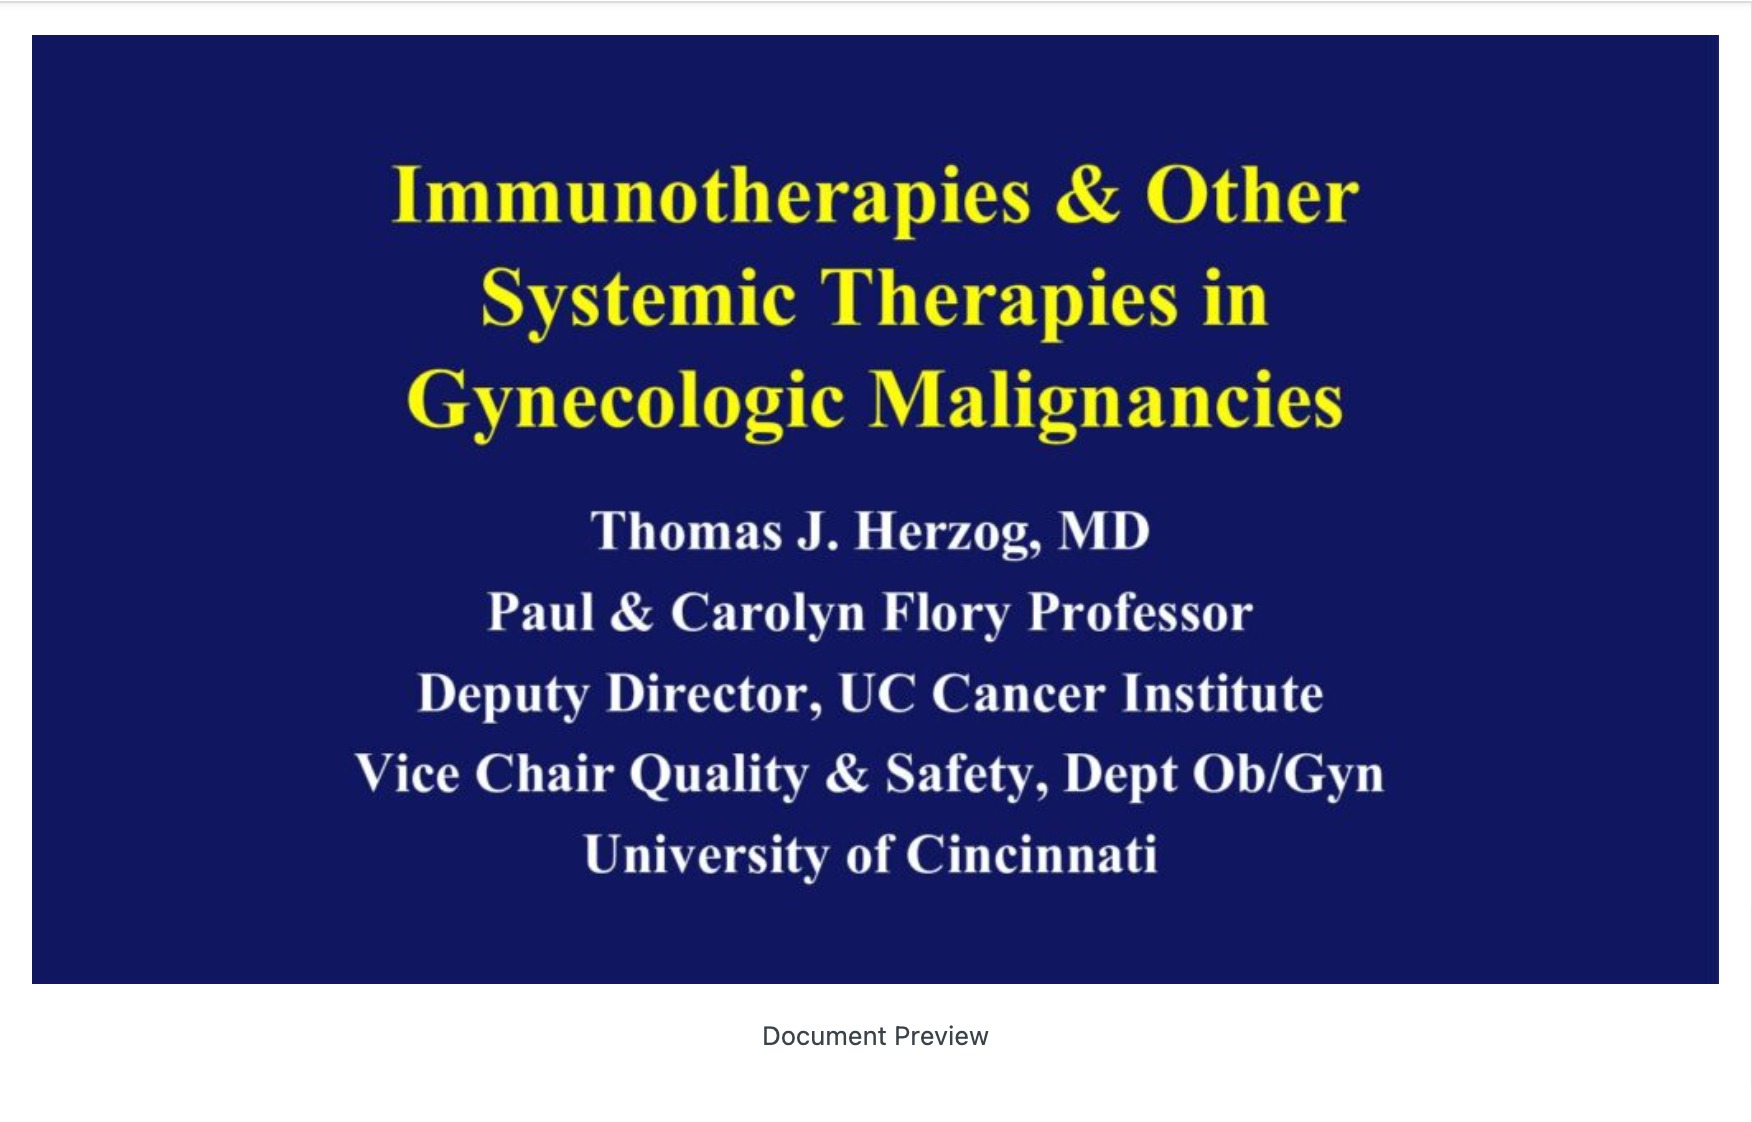 Immunotherapy and Other Systemic Therapy in Gynecologic Malignancies